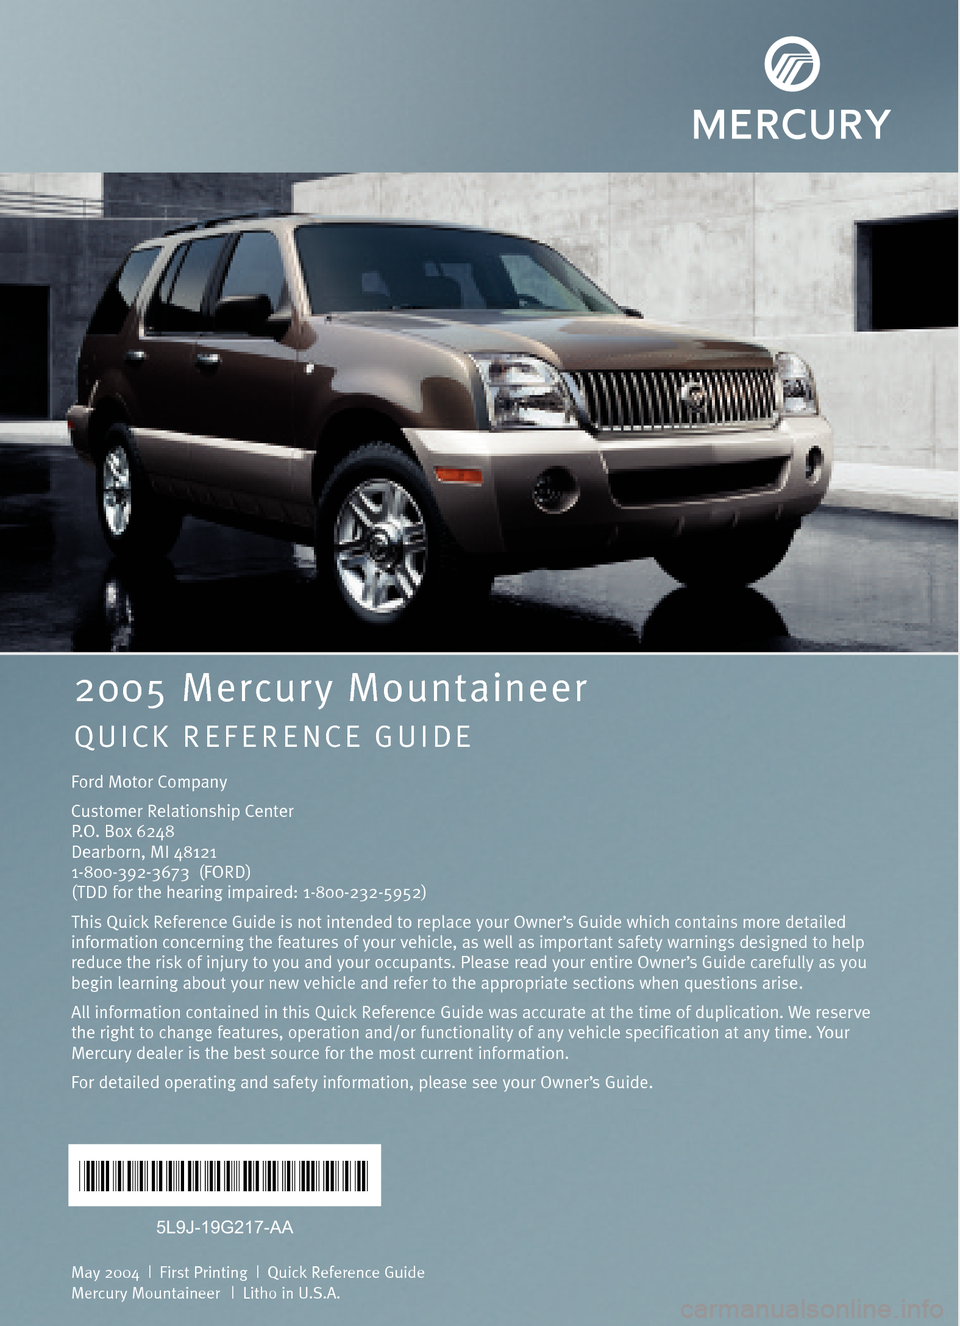 Mercury Mountaineer 2005  Quick Reference Guide Ford Motor Company
Customer Relationship Center
P.O. Box 6248
Dearborn, MI 48121
1�800�392�3673  (FORD)
(TDD for the hearing impaired: 1�800�232�5952)
This Quick Reference Guide is not intended to rep